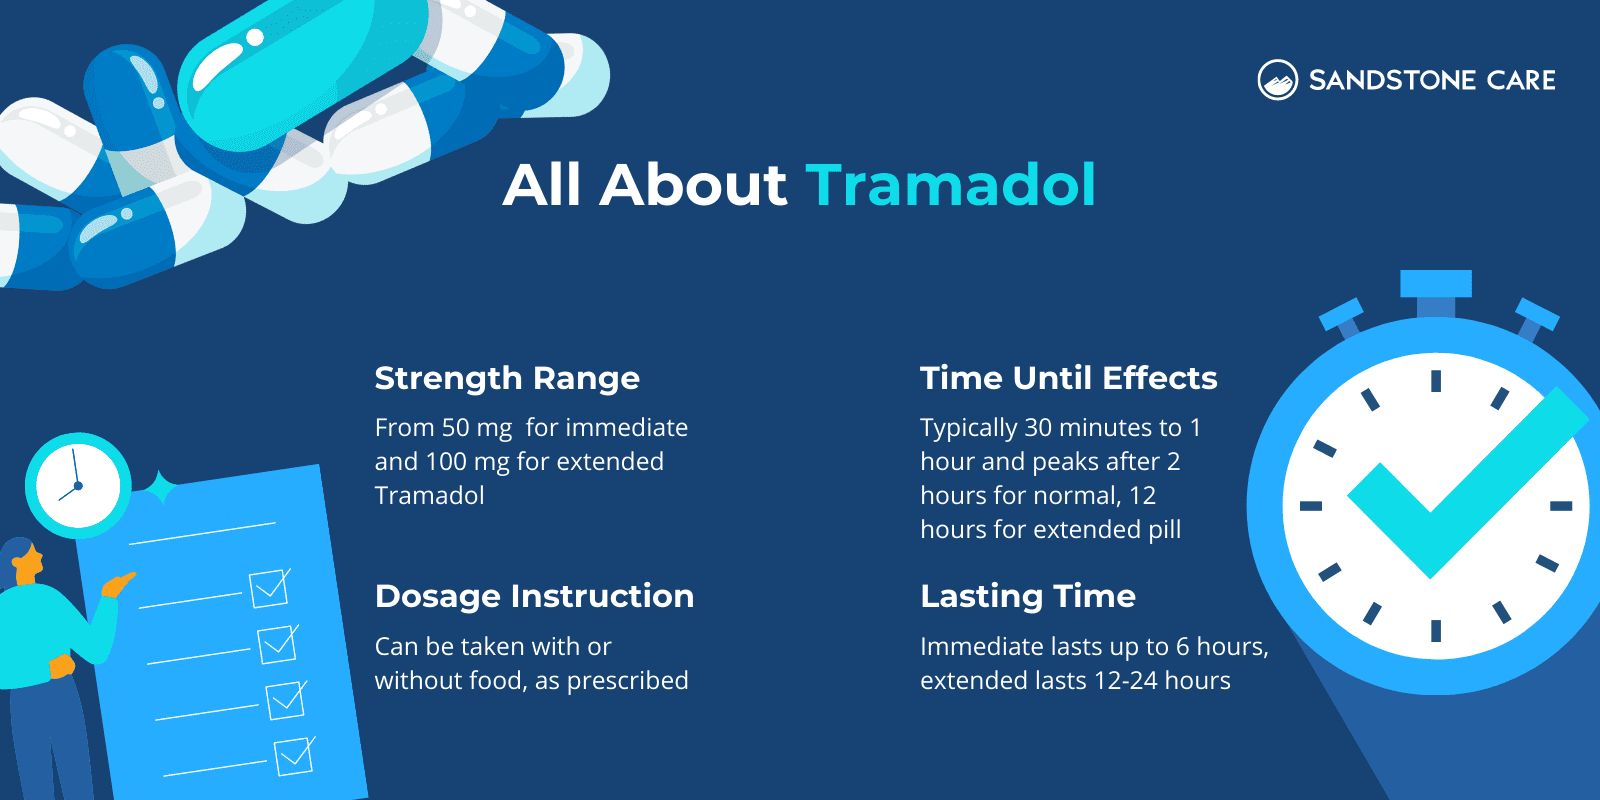 Strength Range, Dosage Instruction, Time Until Effects, and Lasting Time information about Tramadol laid out in a beautiful way with digital illustration of Tramadol pills, checklist, and timer